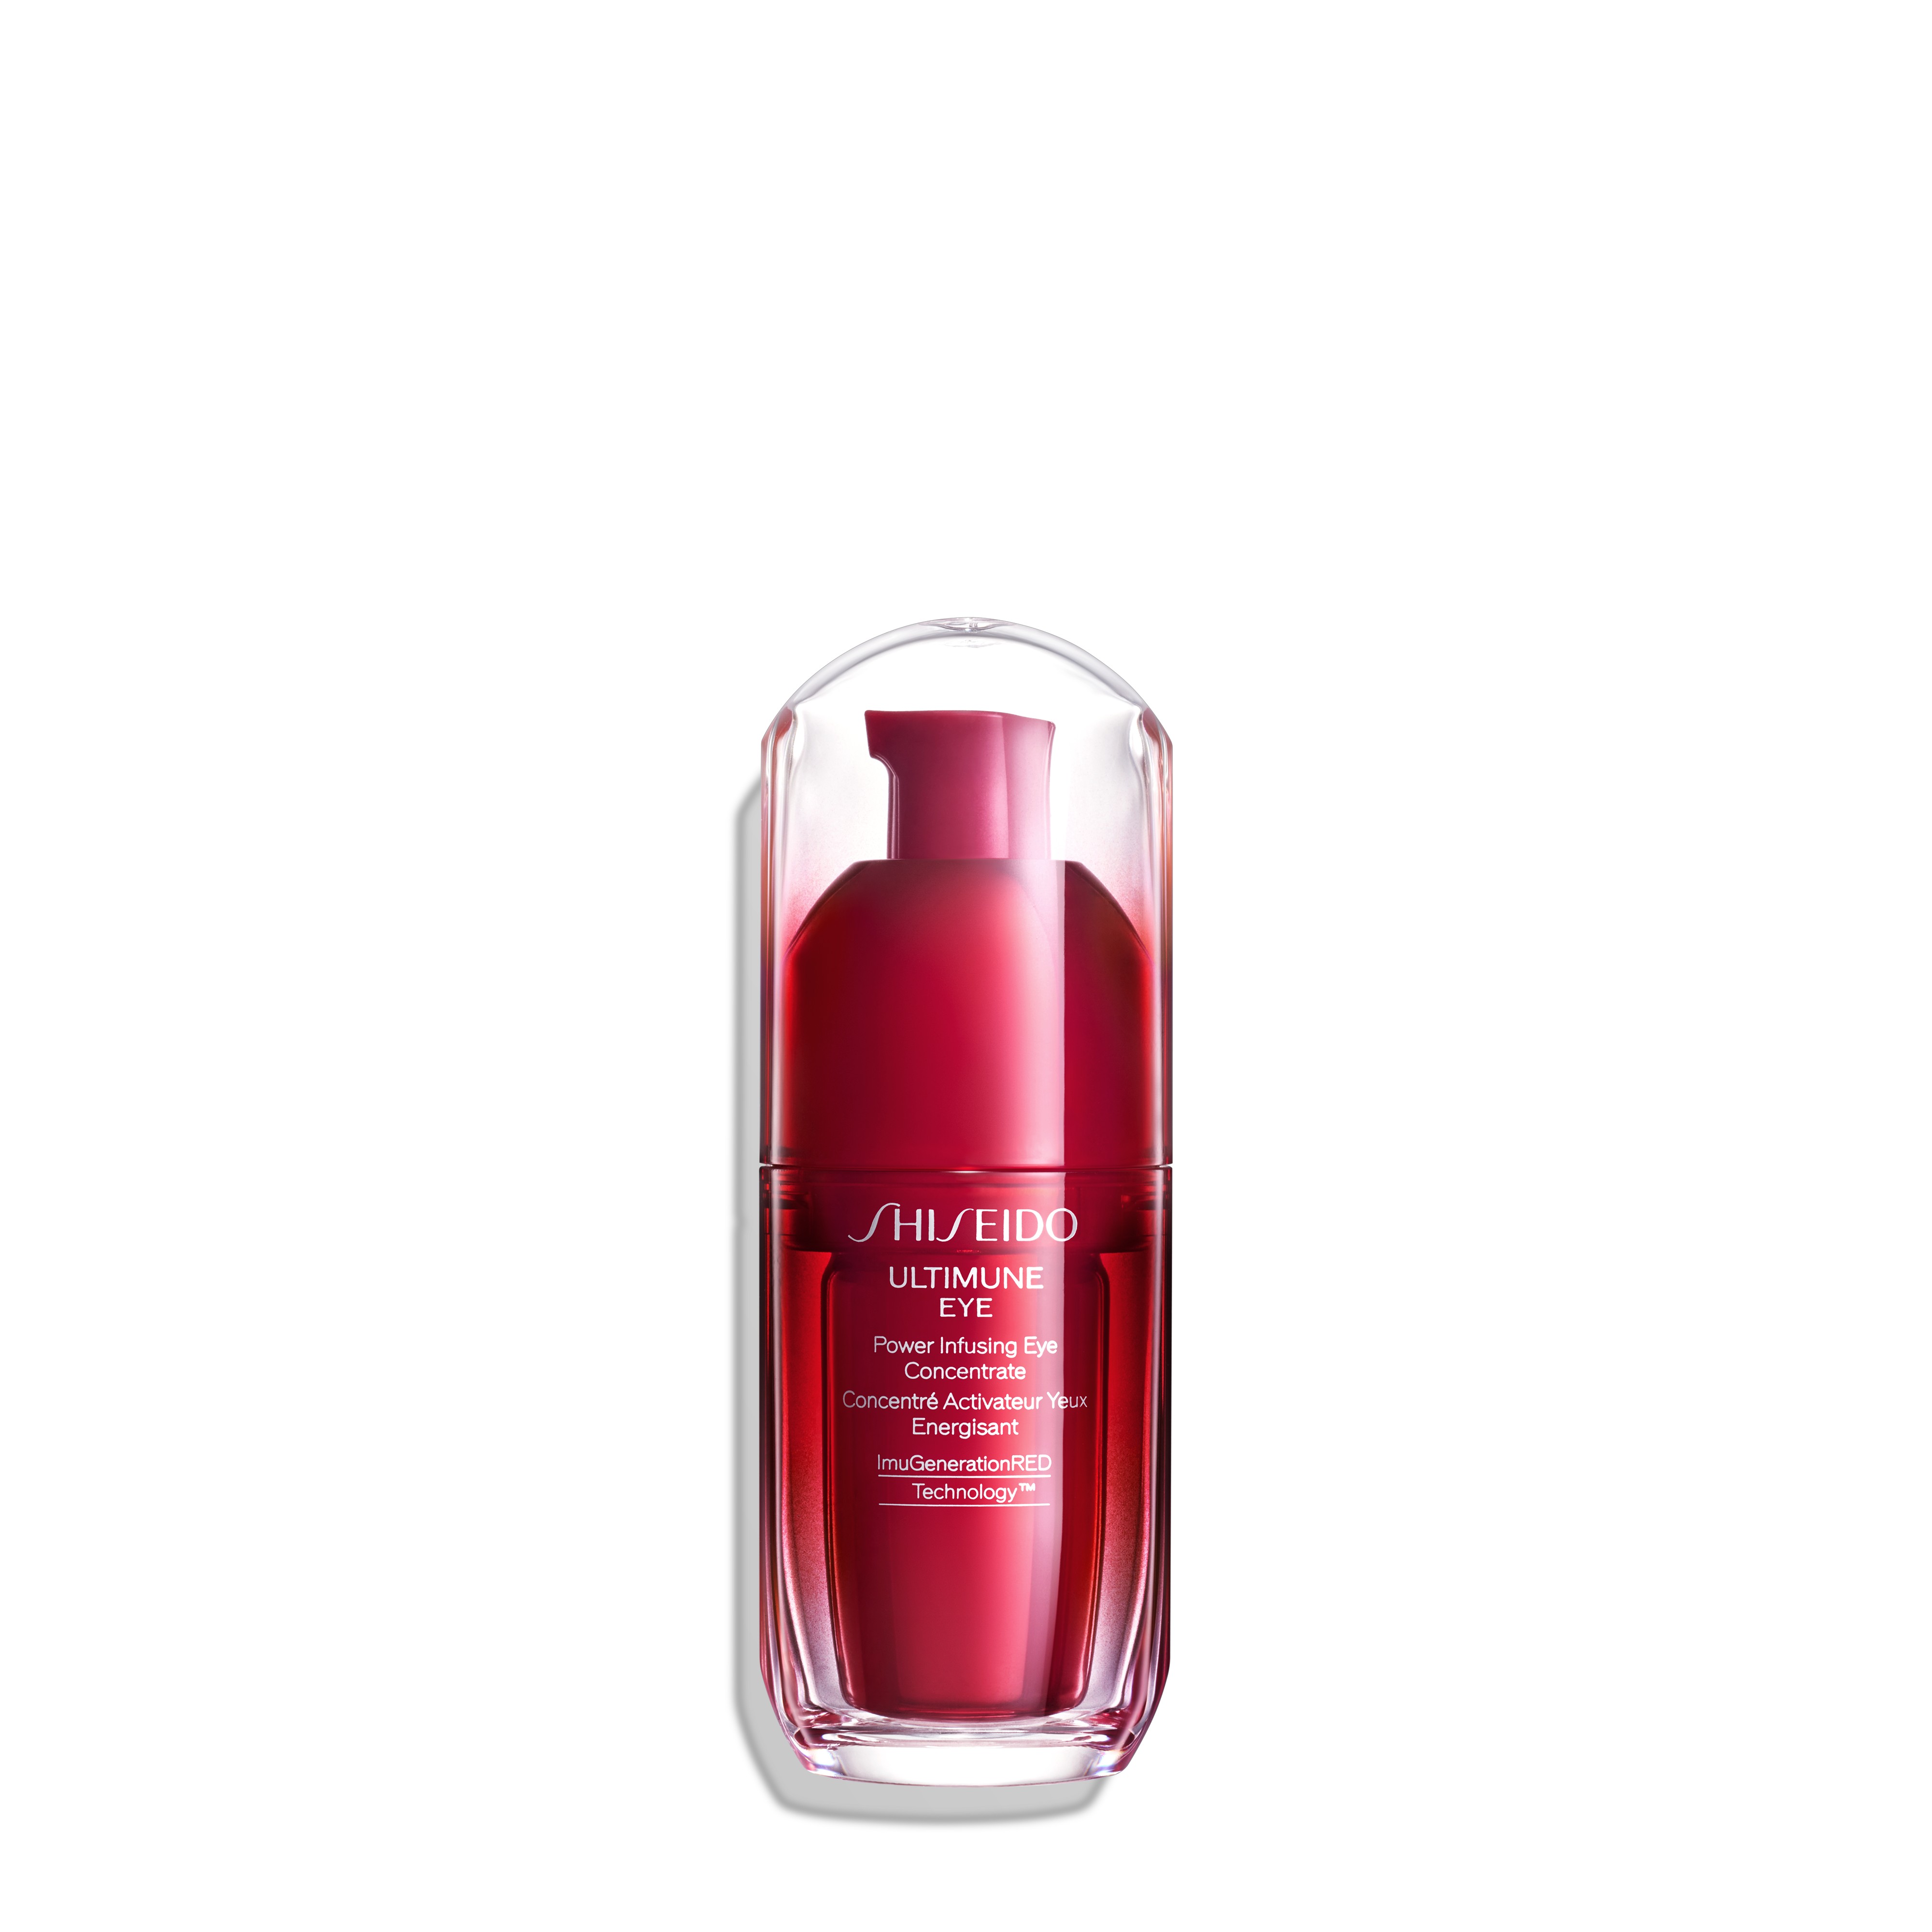 Shiseido-Power Infusing Eye Concentrate